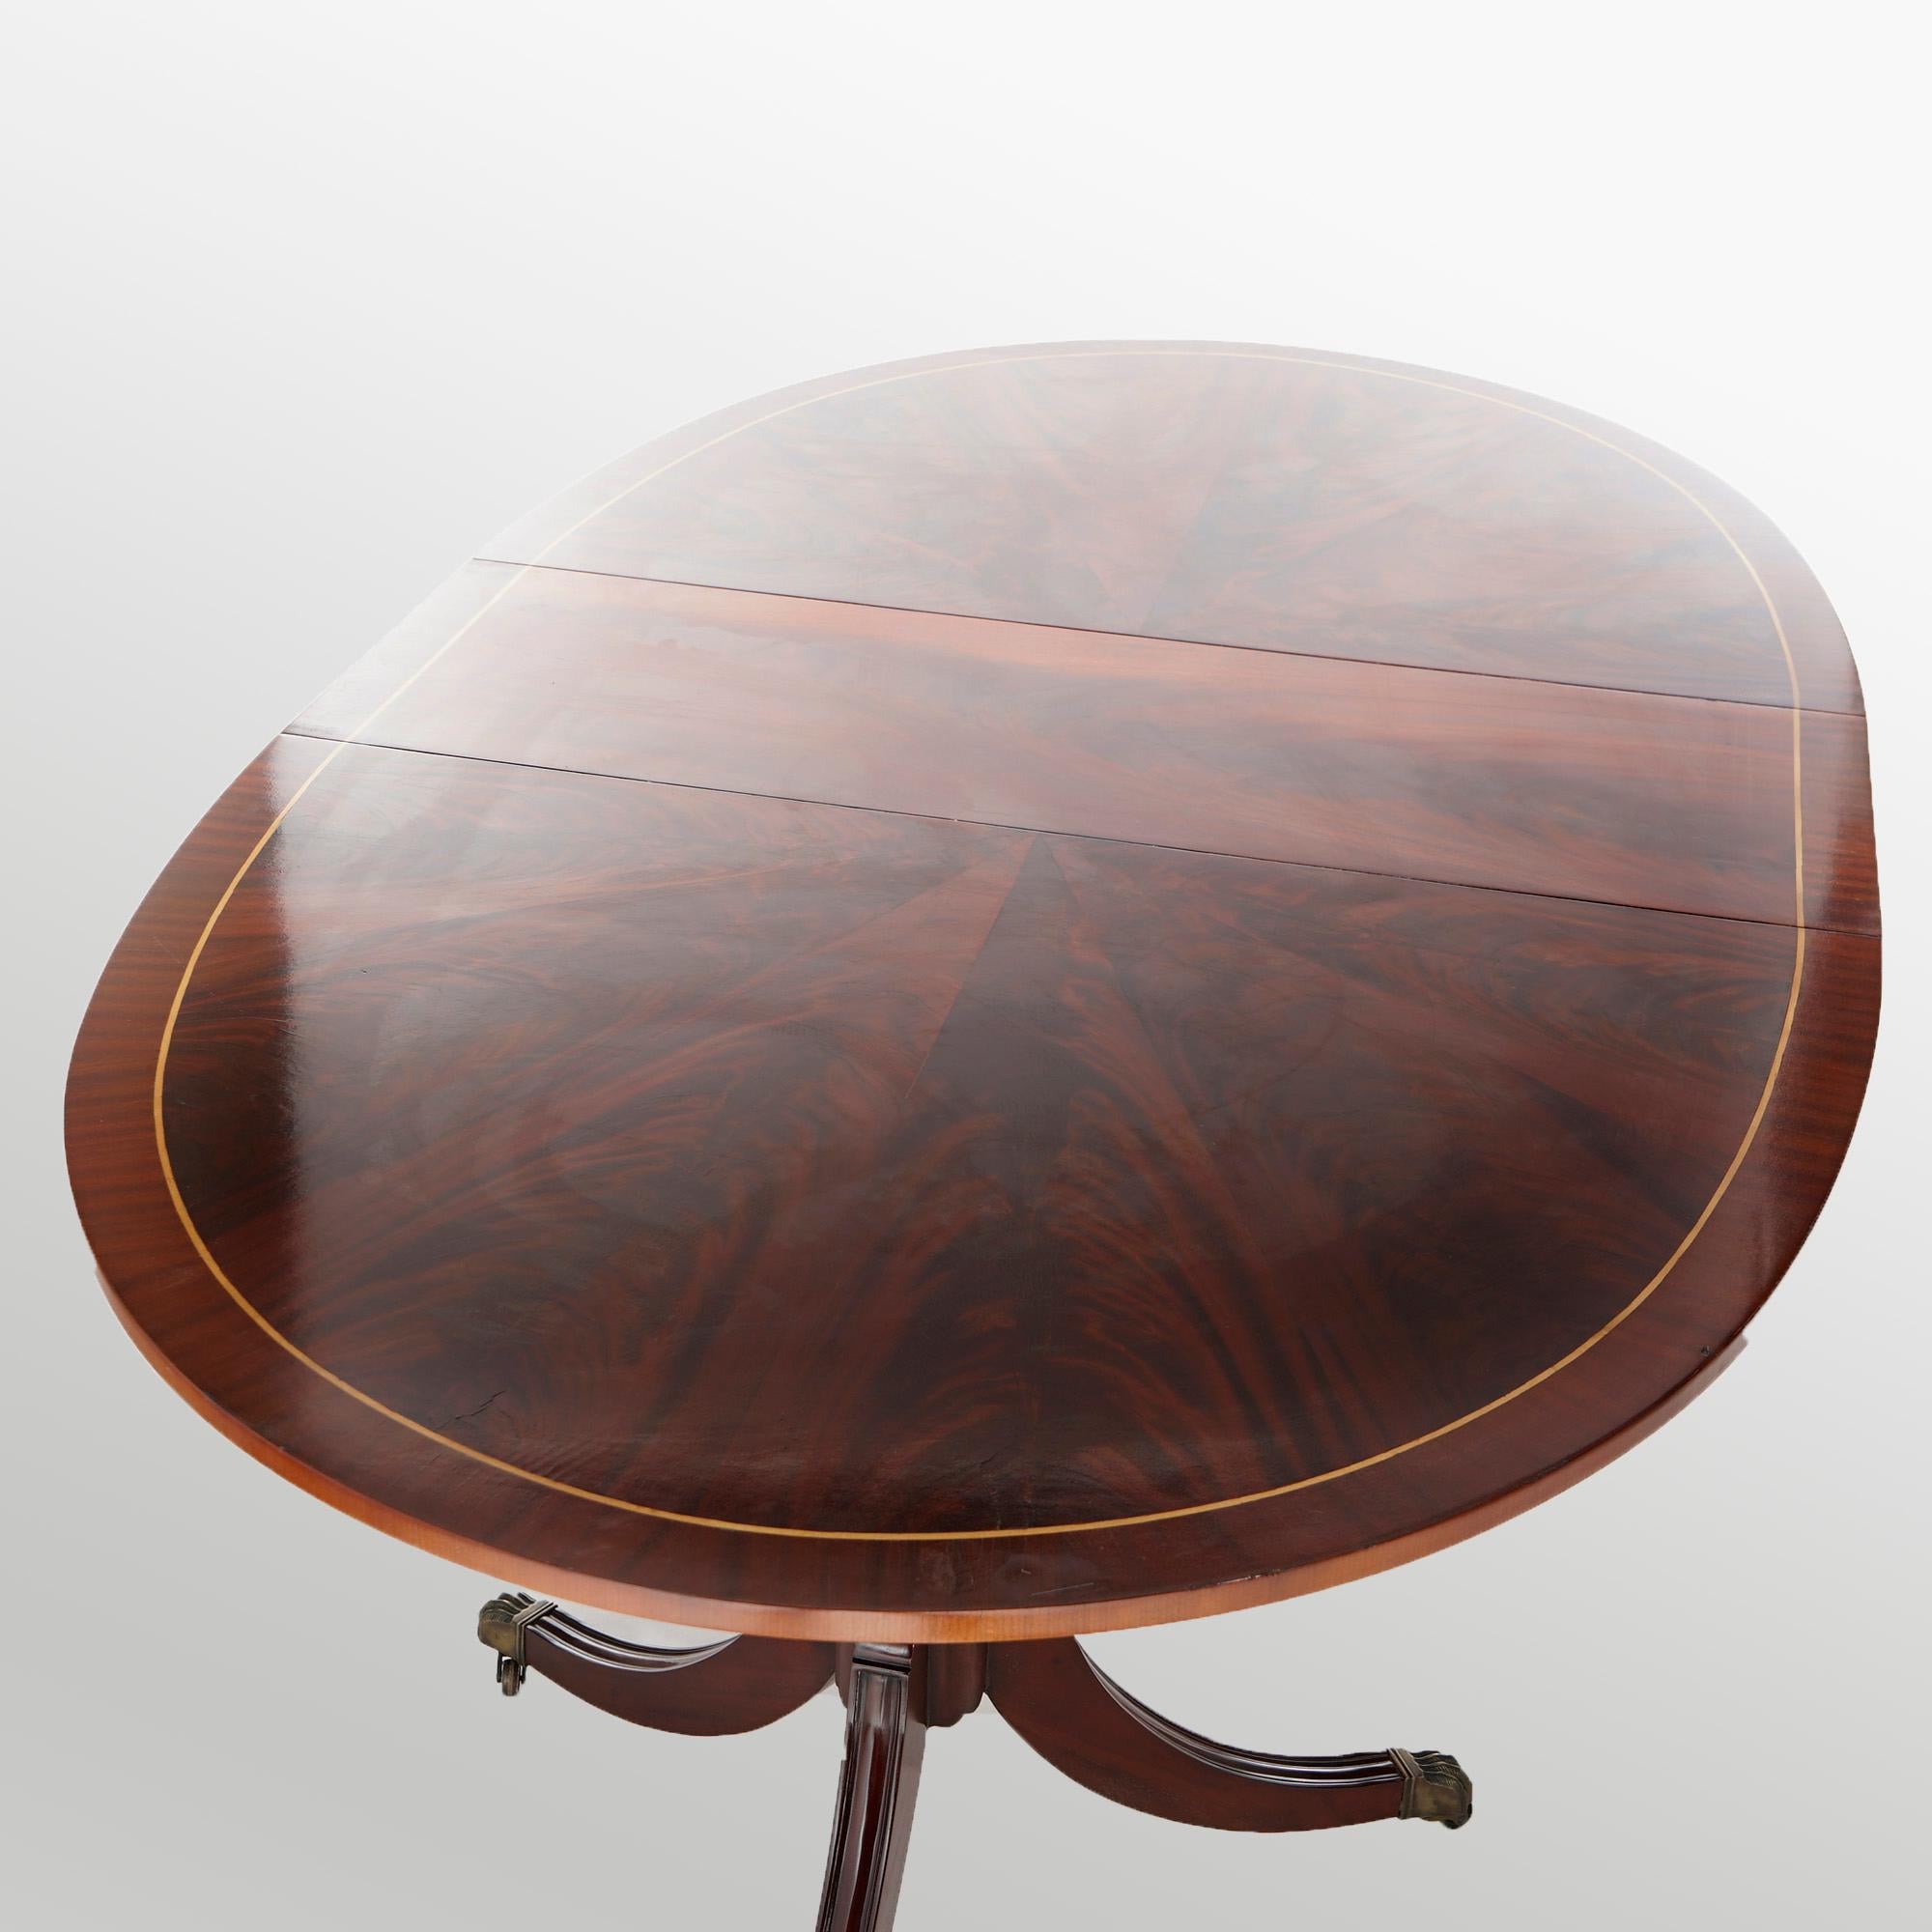 duncan phyfe dining table 1940